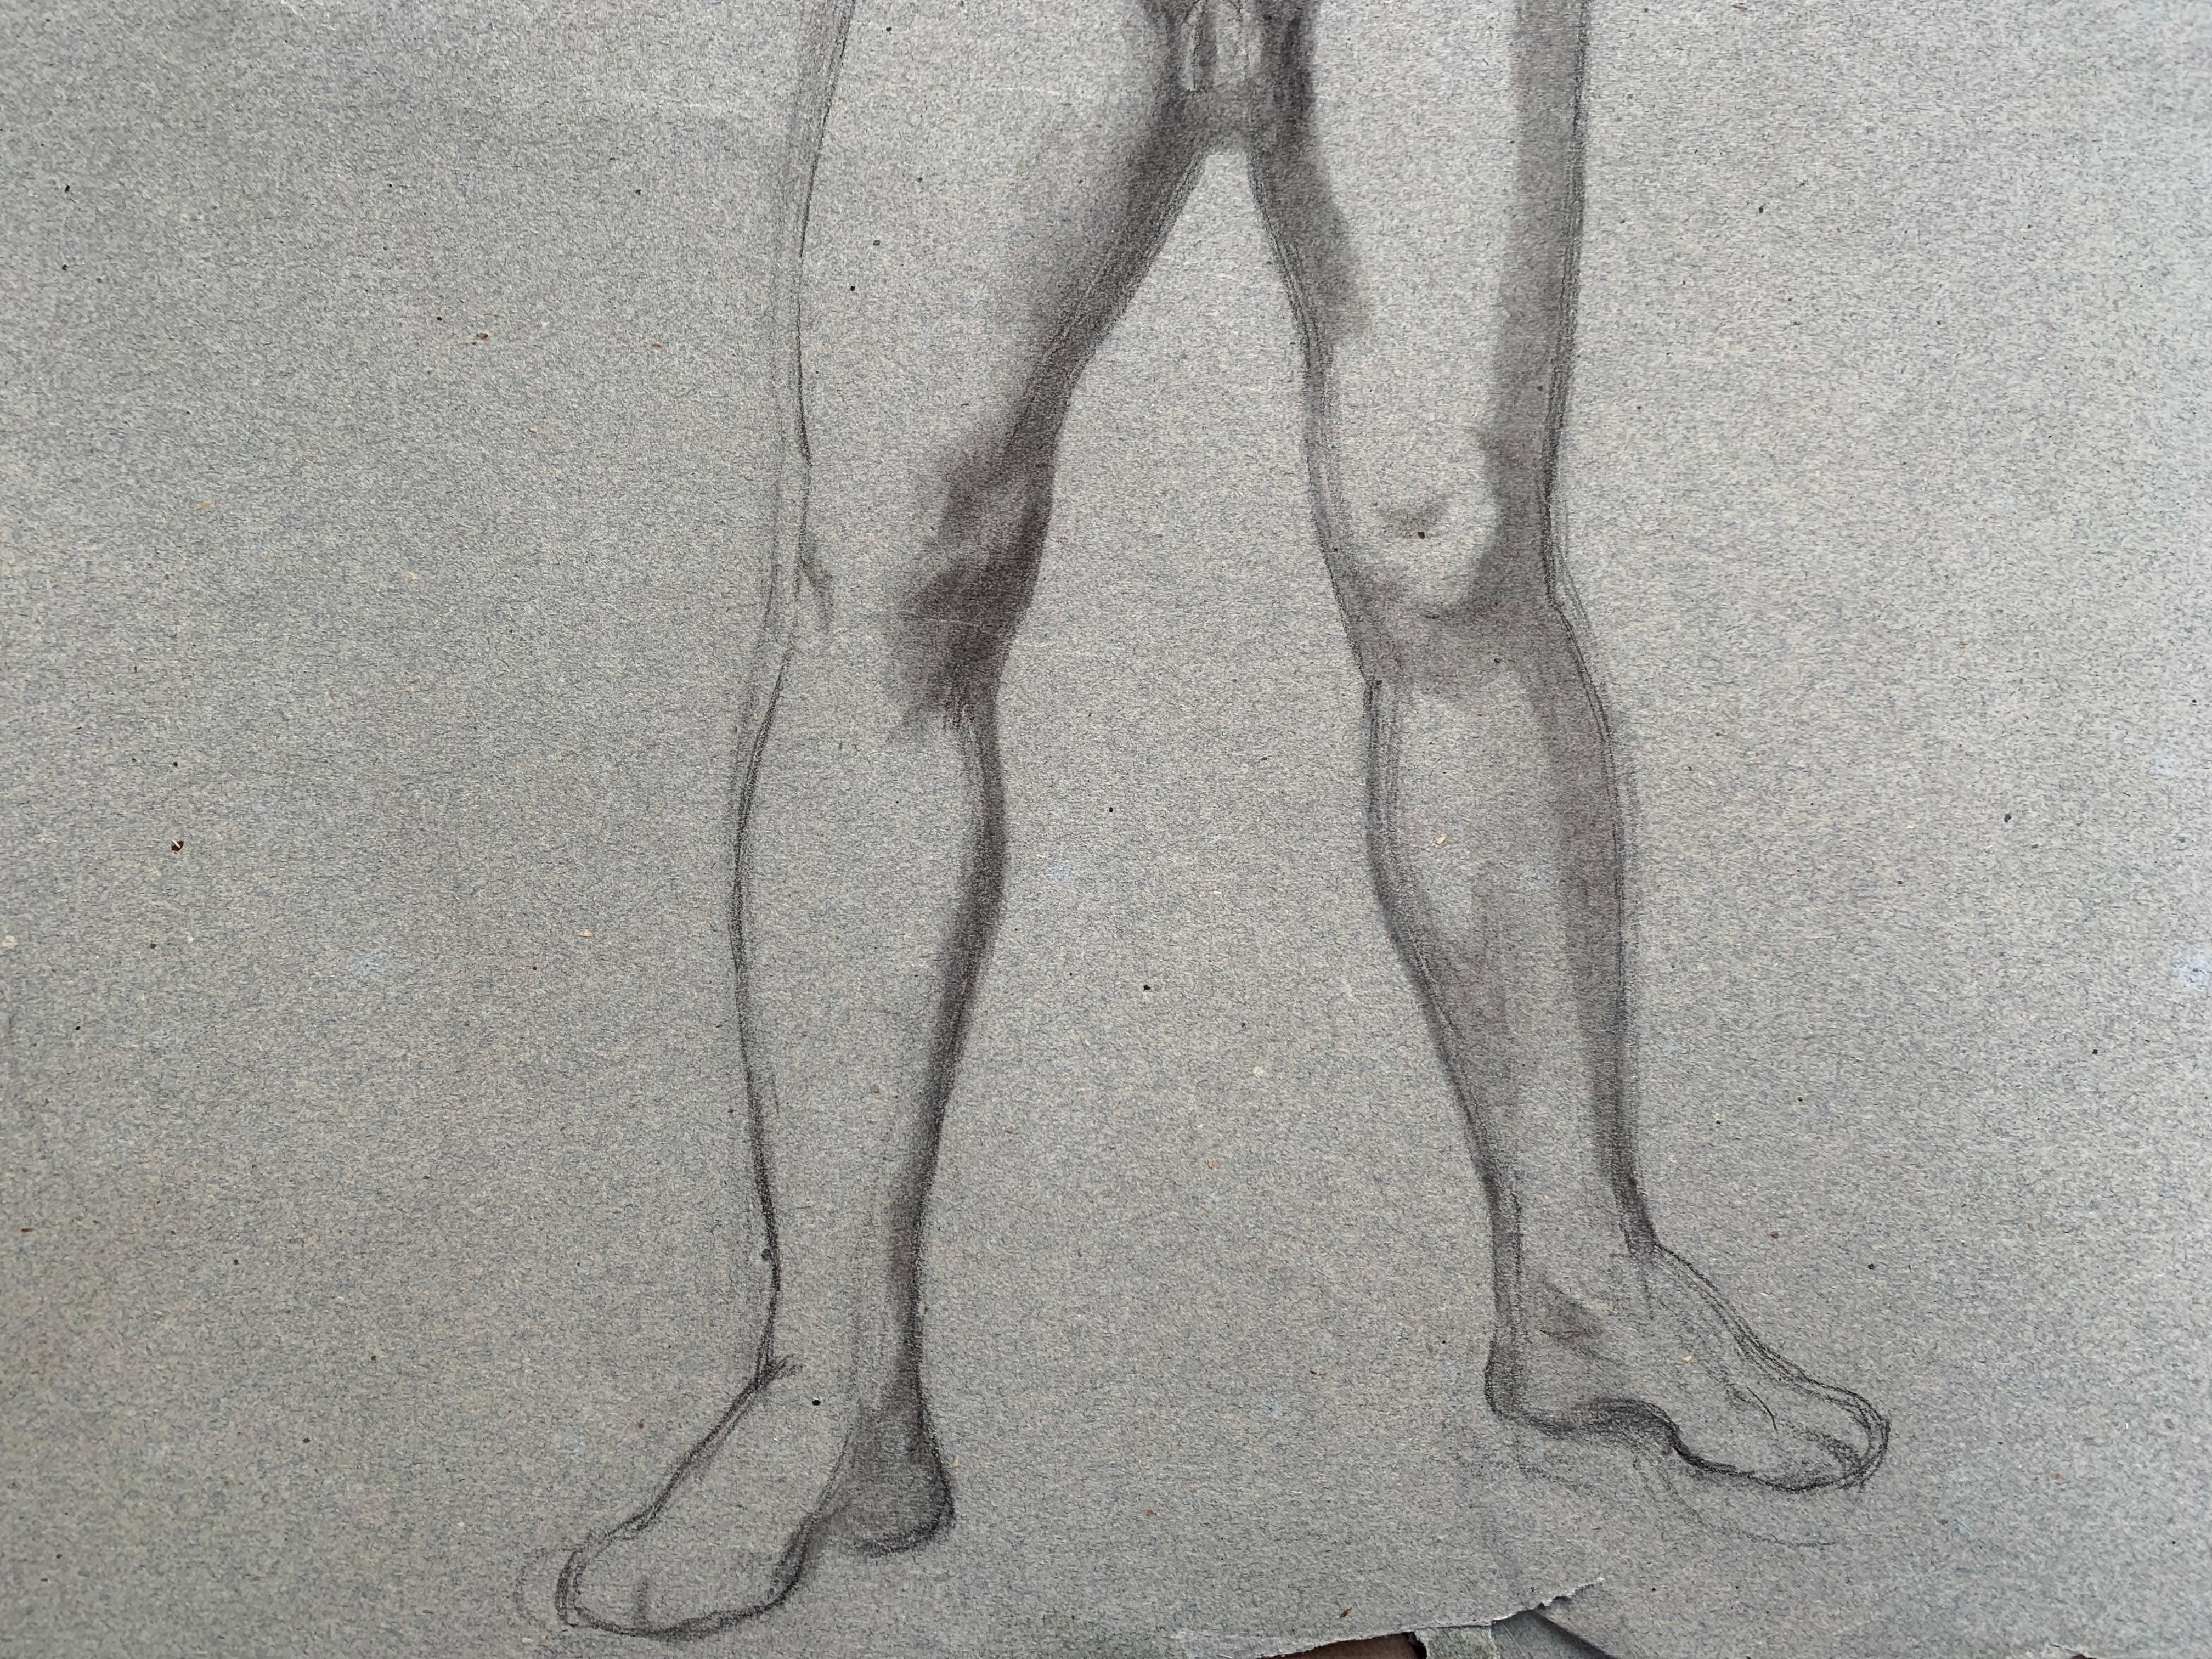 Preparatory anatomical study for the figure of a man with hands on his face. - Art by Enrico Reffo